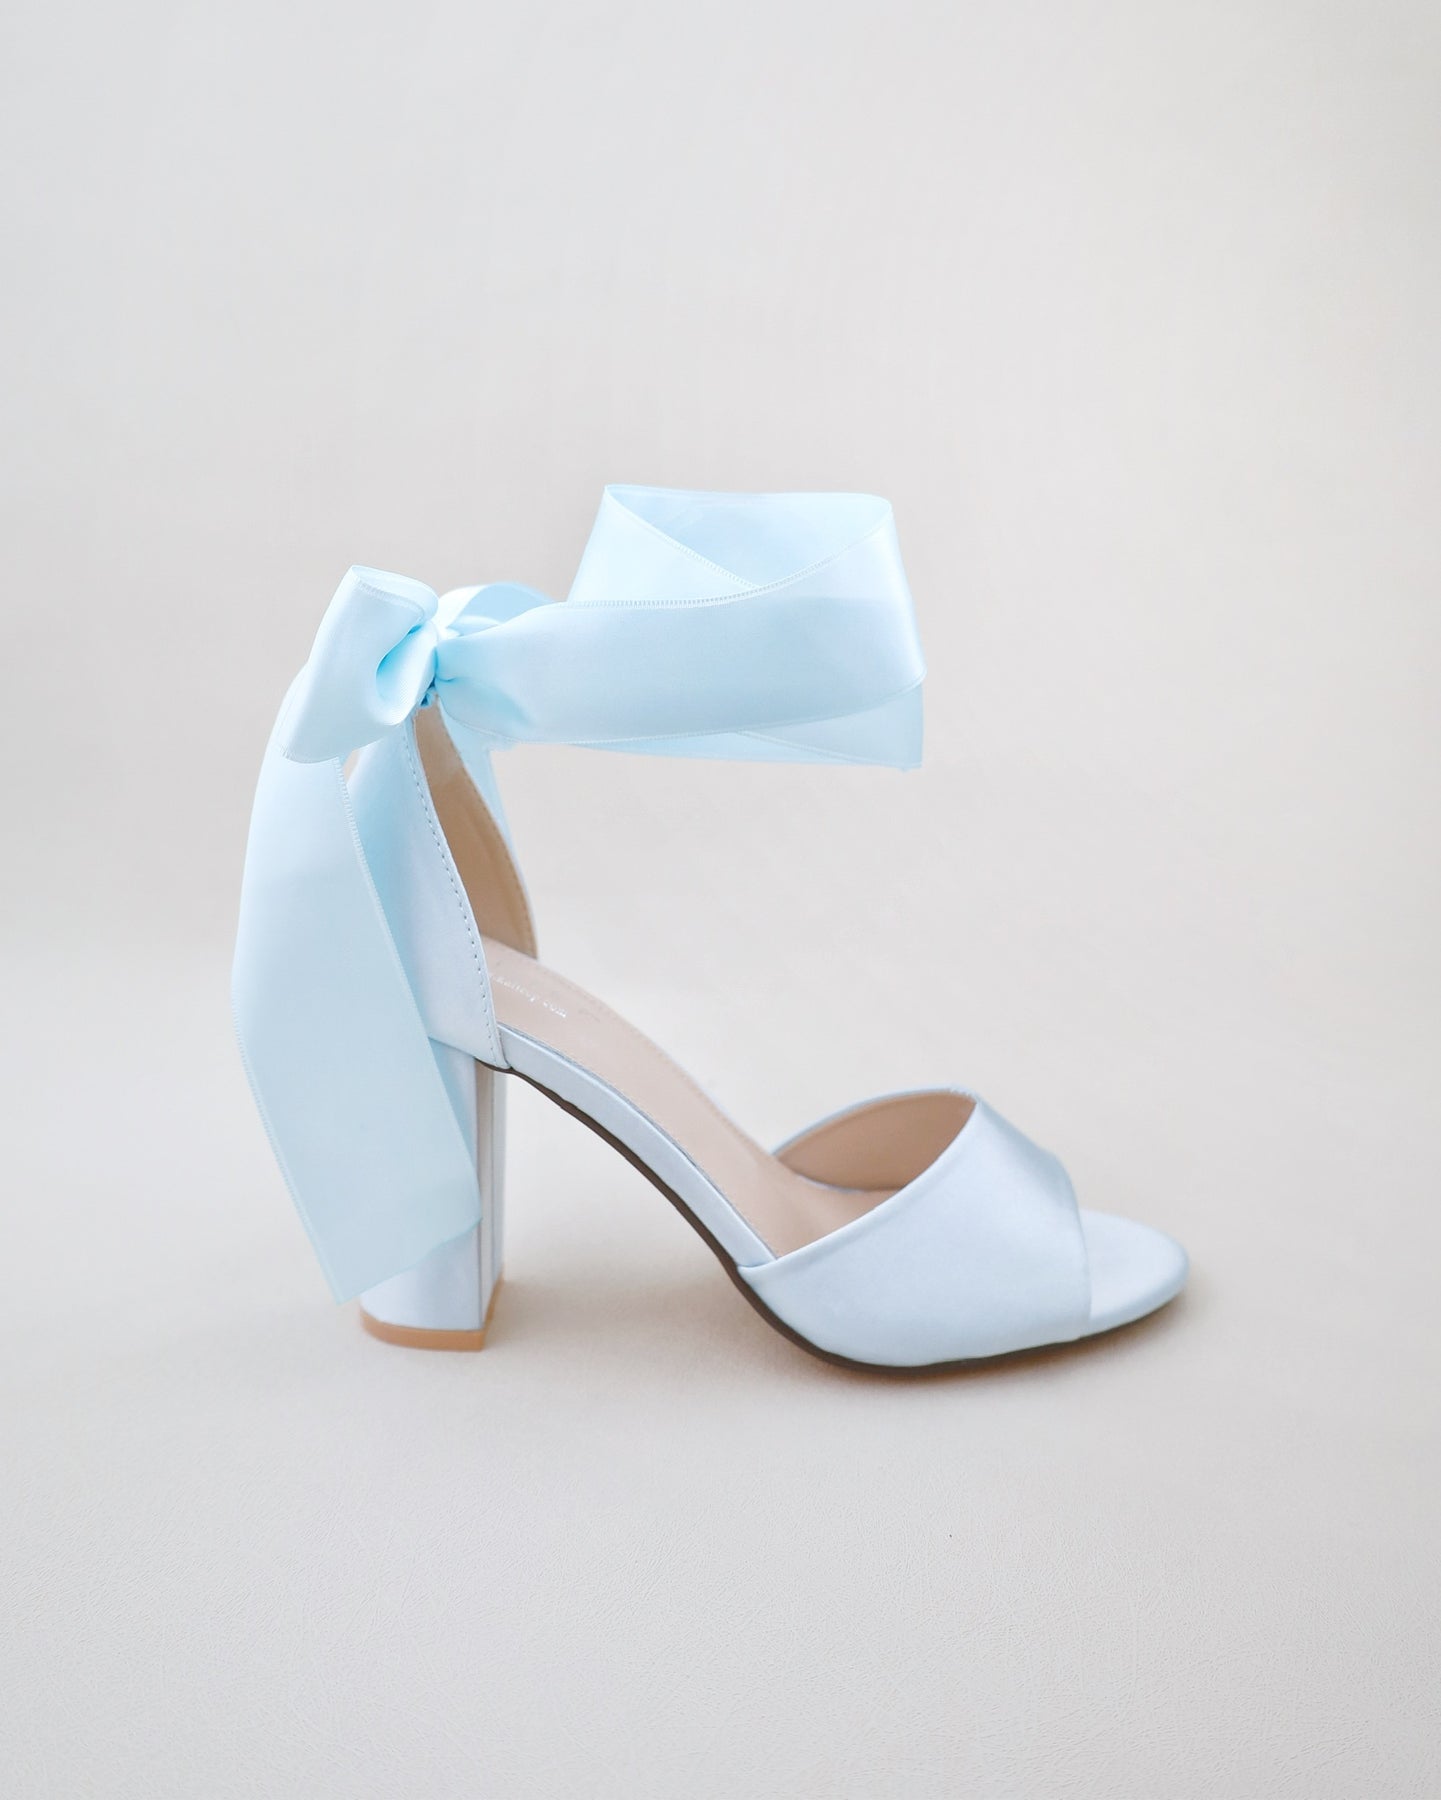 Light Blue Satin Block Heel With Pearls Ankle Strap, Women Wedding Shoes, Bridal  Shoes, Bridal Heels, Bride Heels - Etsy | Pearl shoes, Heels, Bride heels